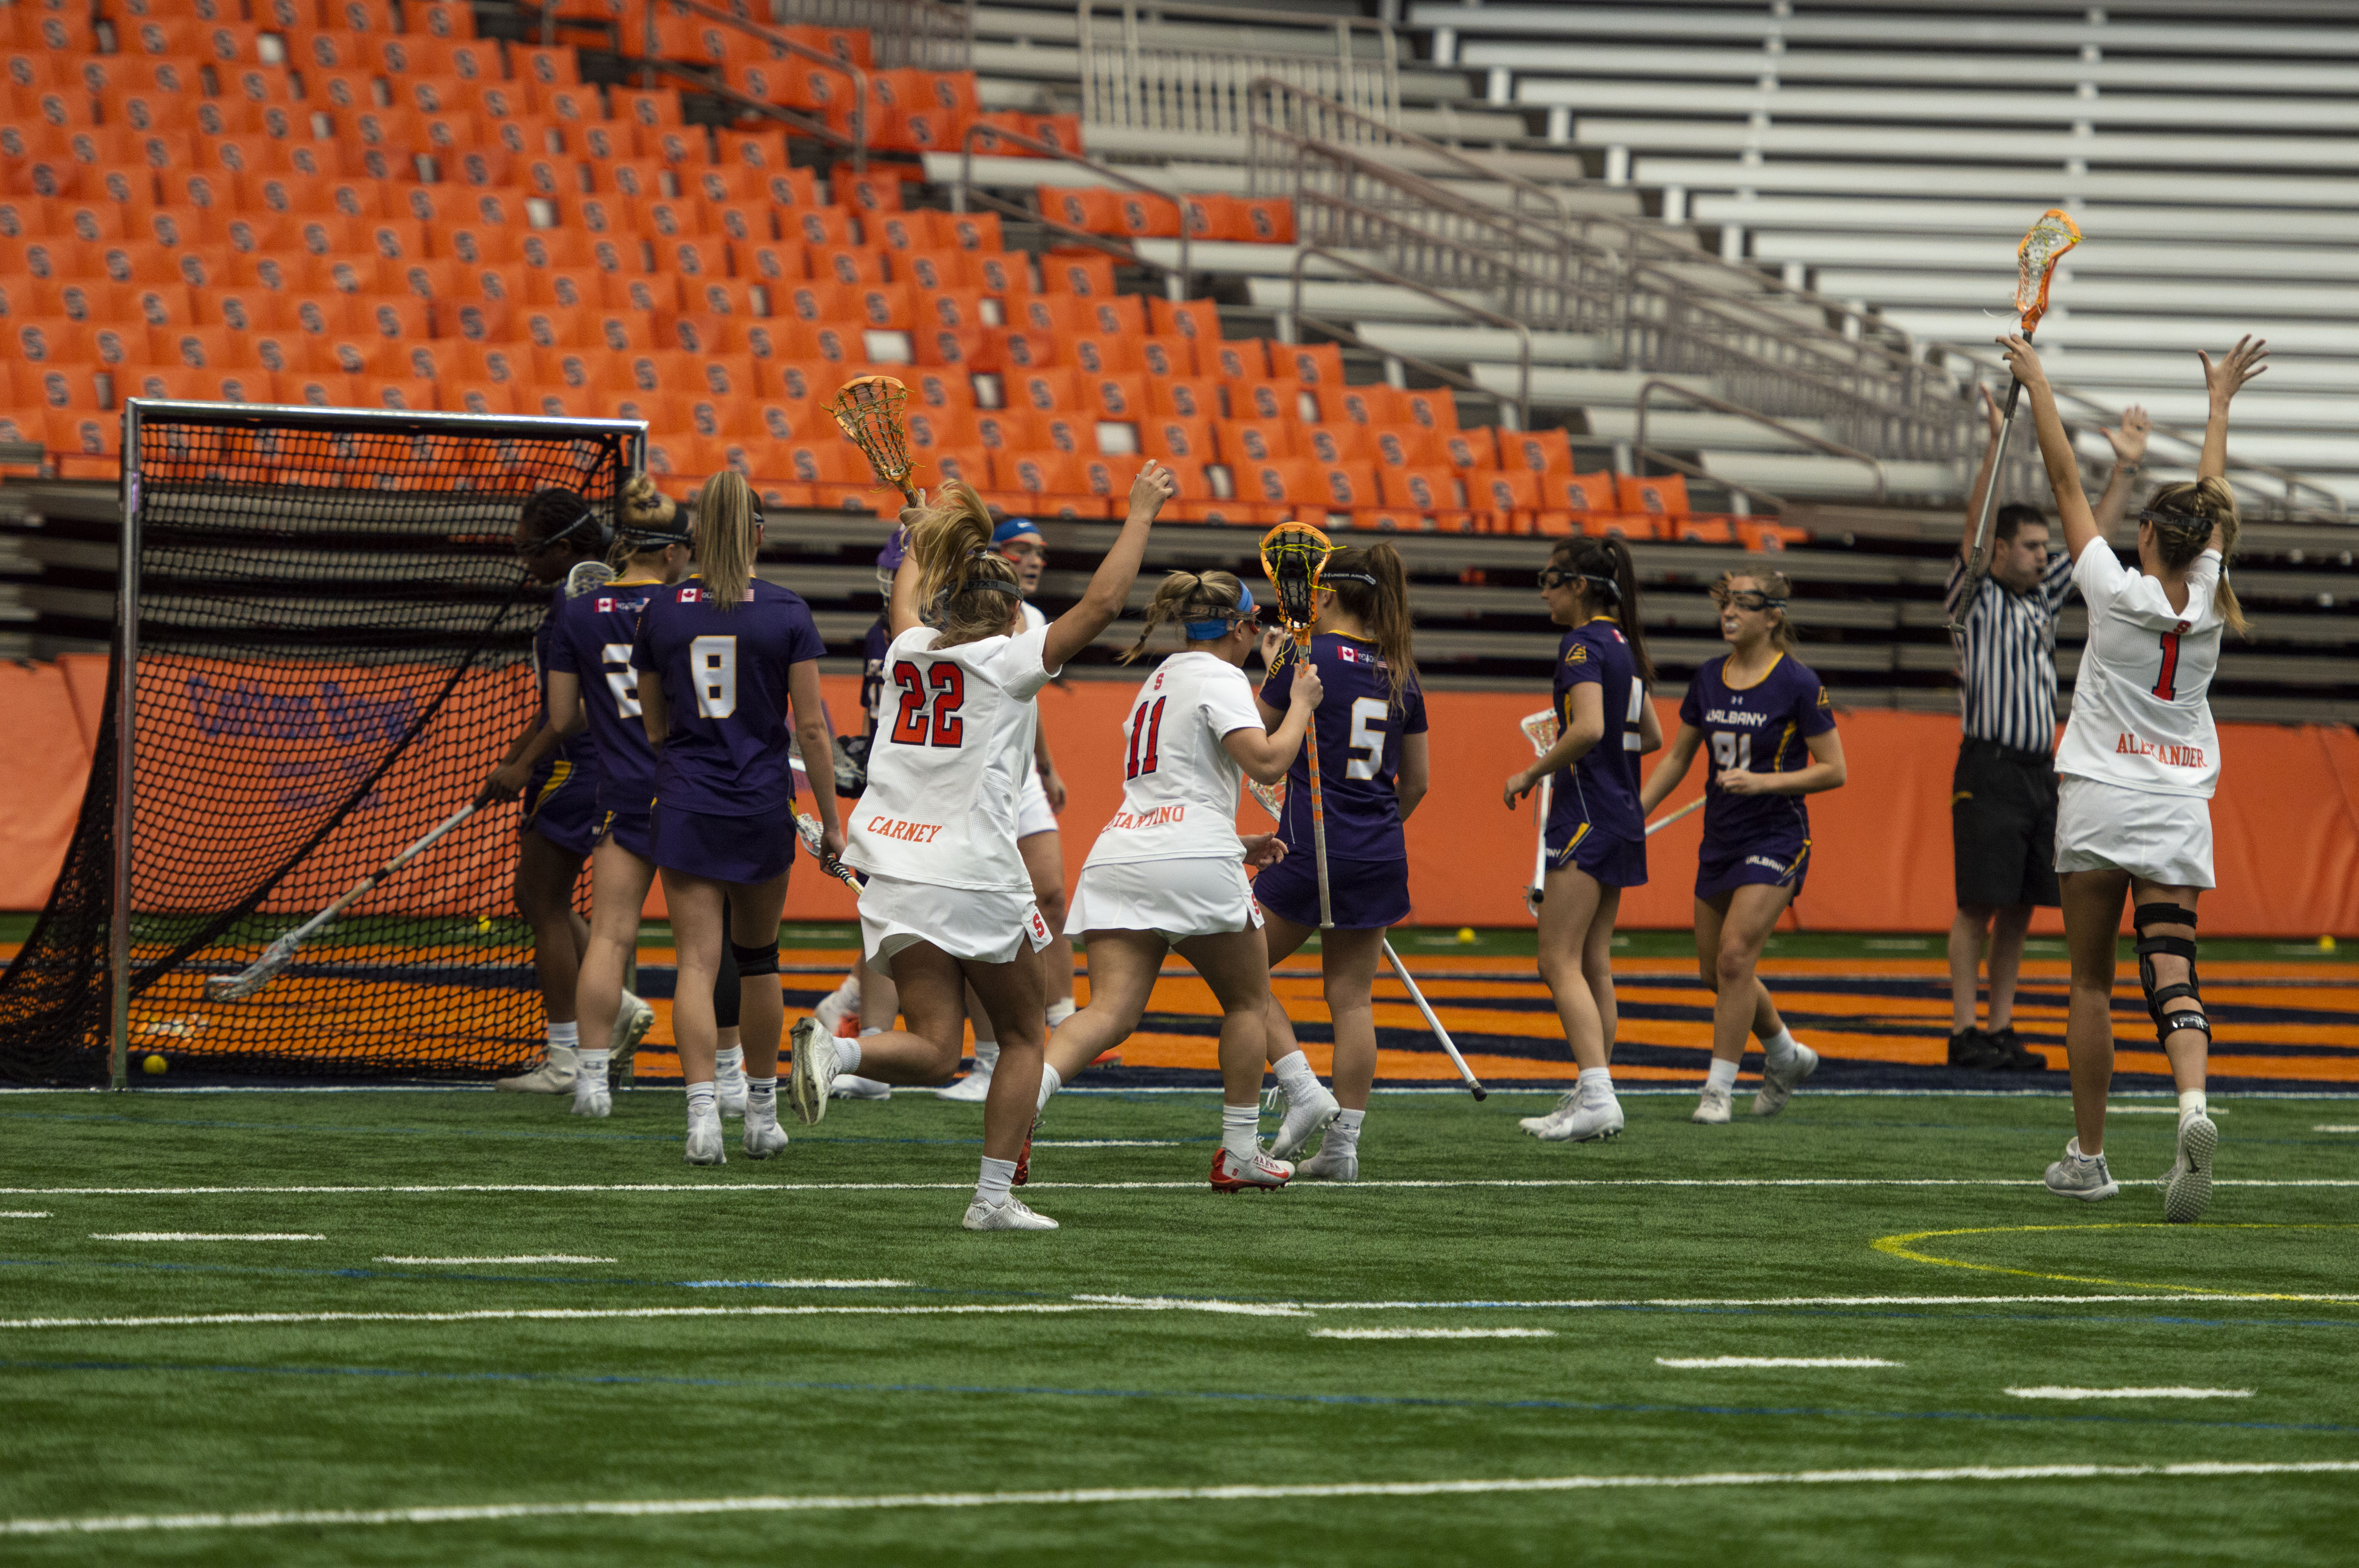 The Syracuse Women’s Lacrosse team celebrate after a goal during Saturday's game vs. Albany in the Carrier Dome.